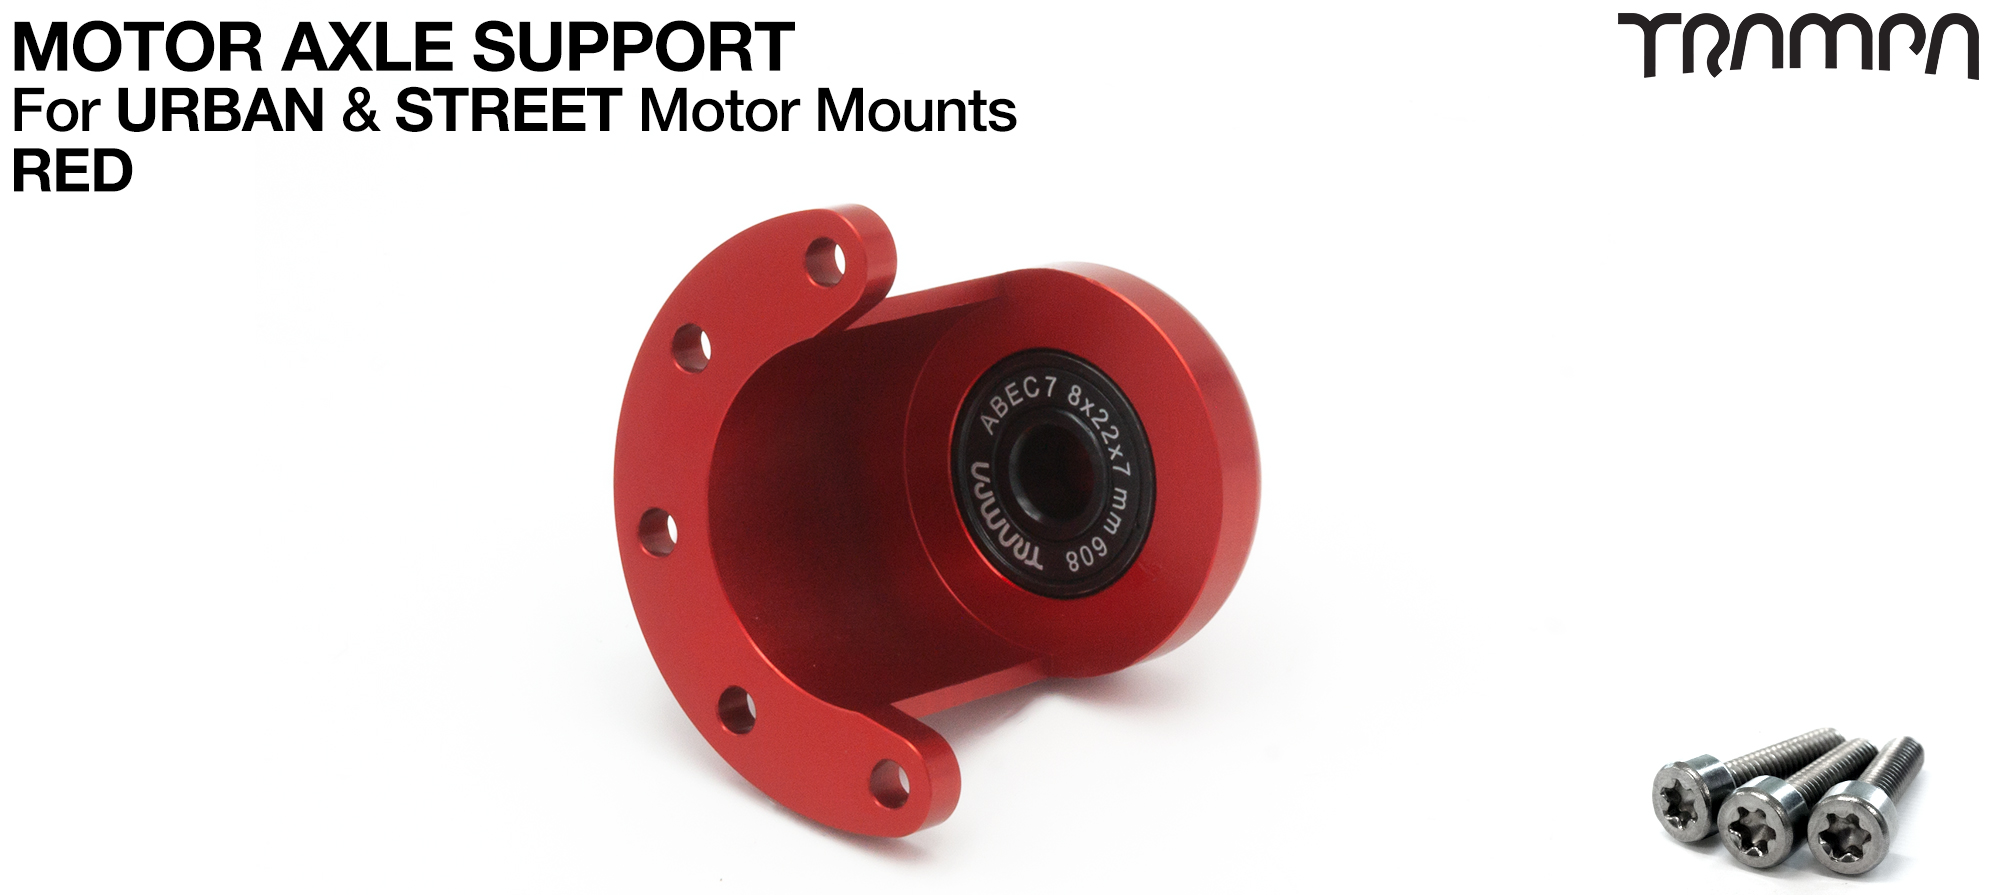 Universal Motor Axle Support Housing - RED